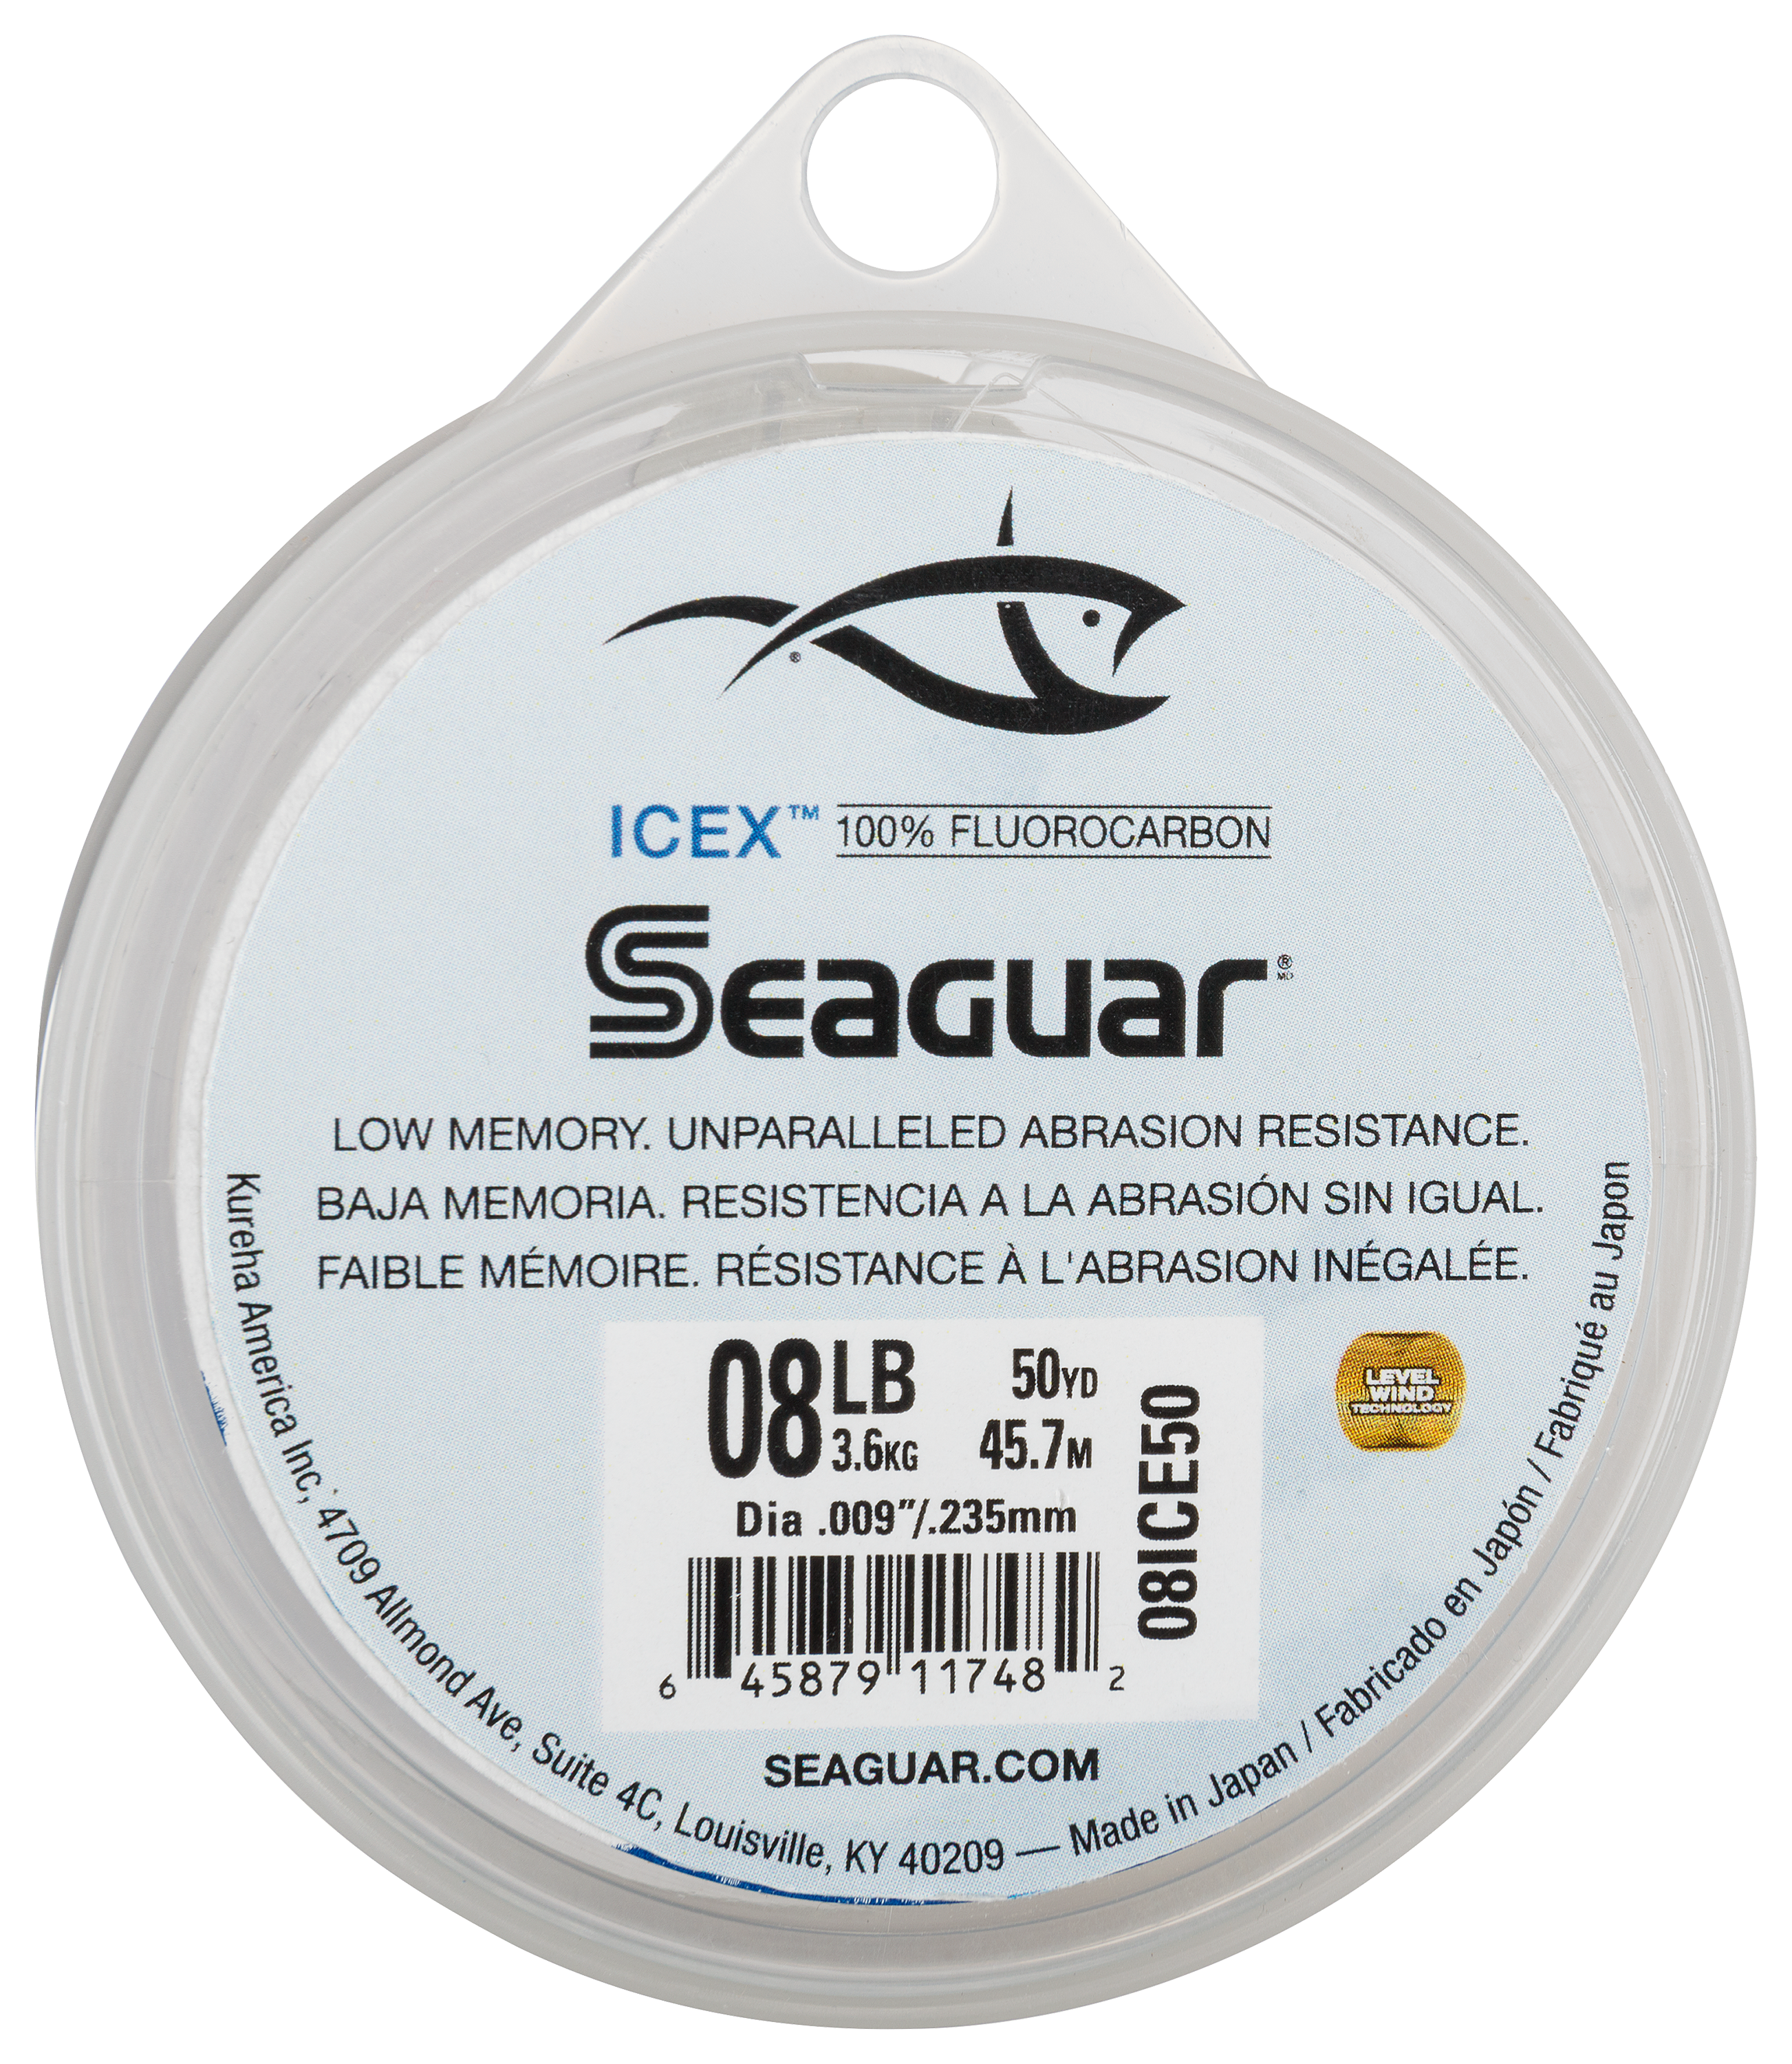 IceX- Seaguar Fluorcarbon Fishing Line Built for Cold Water